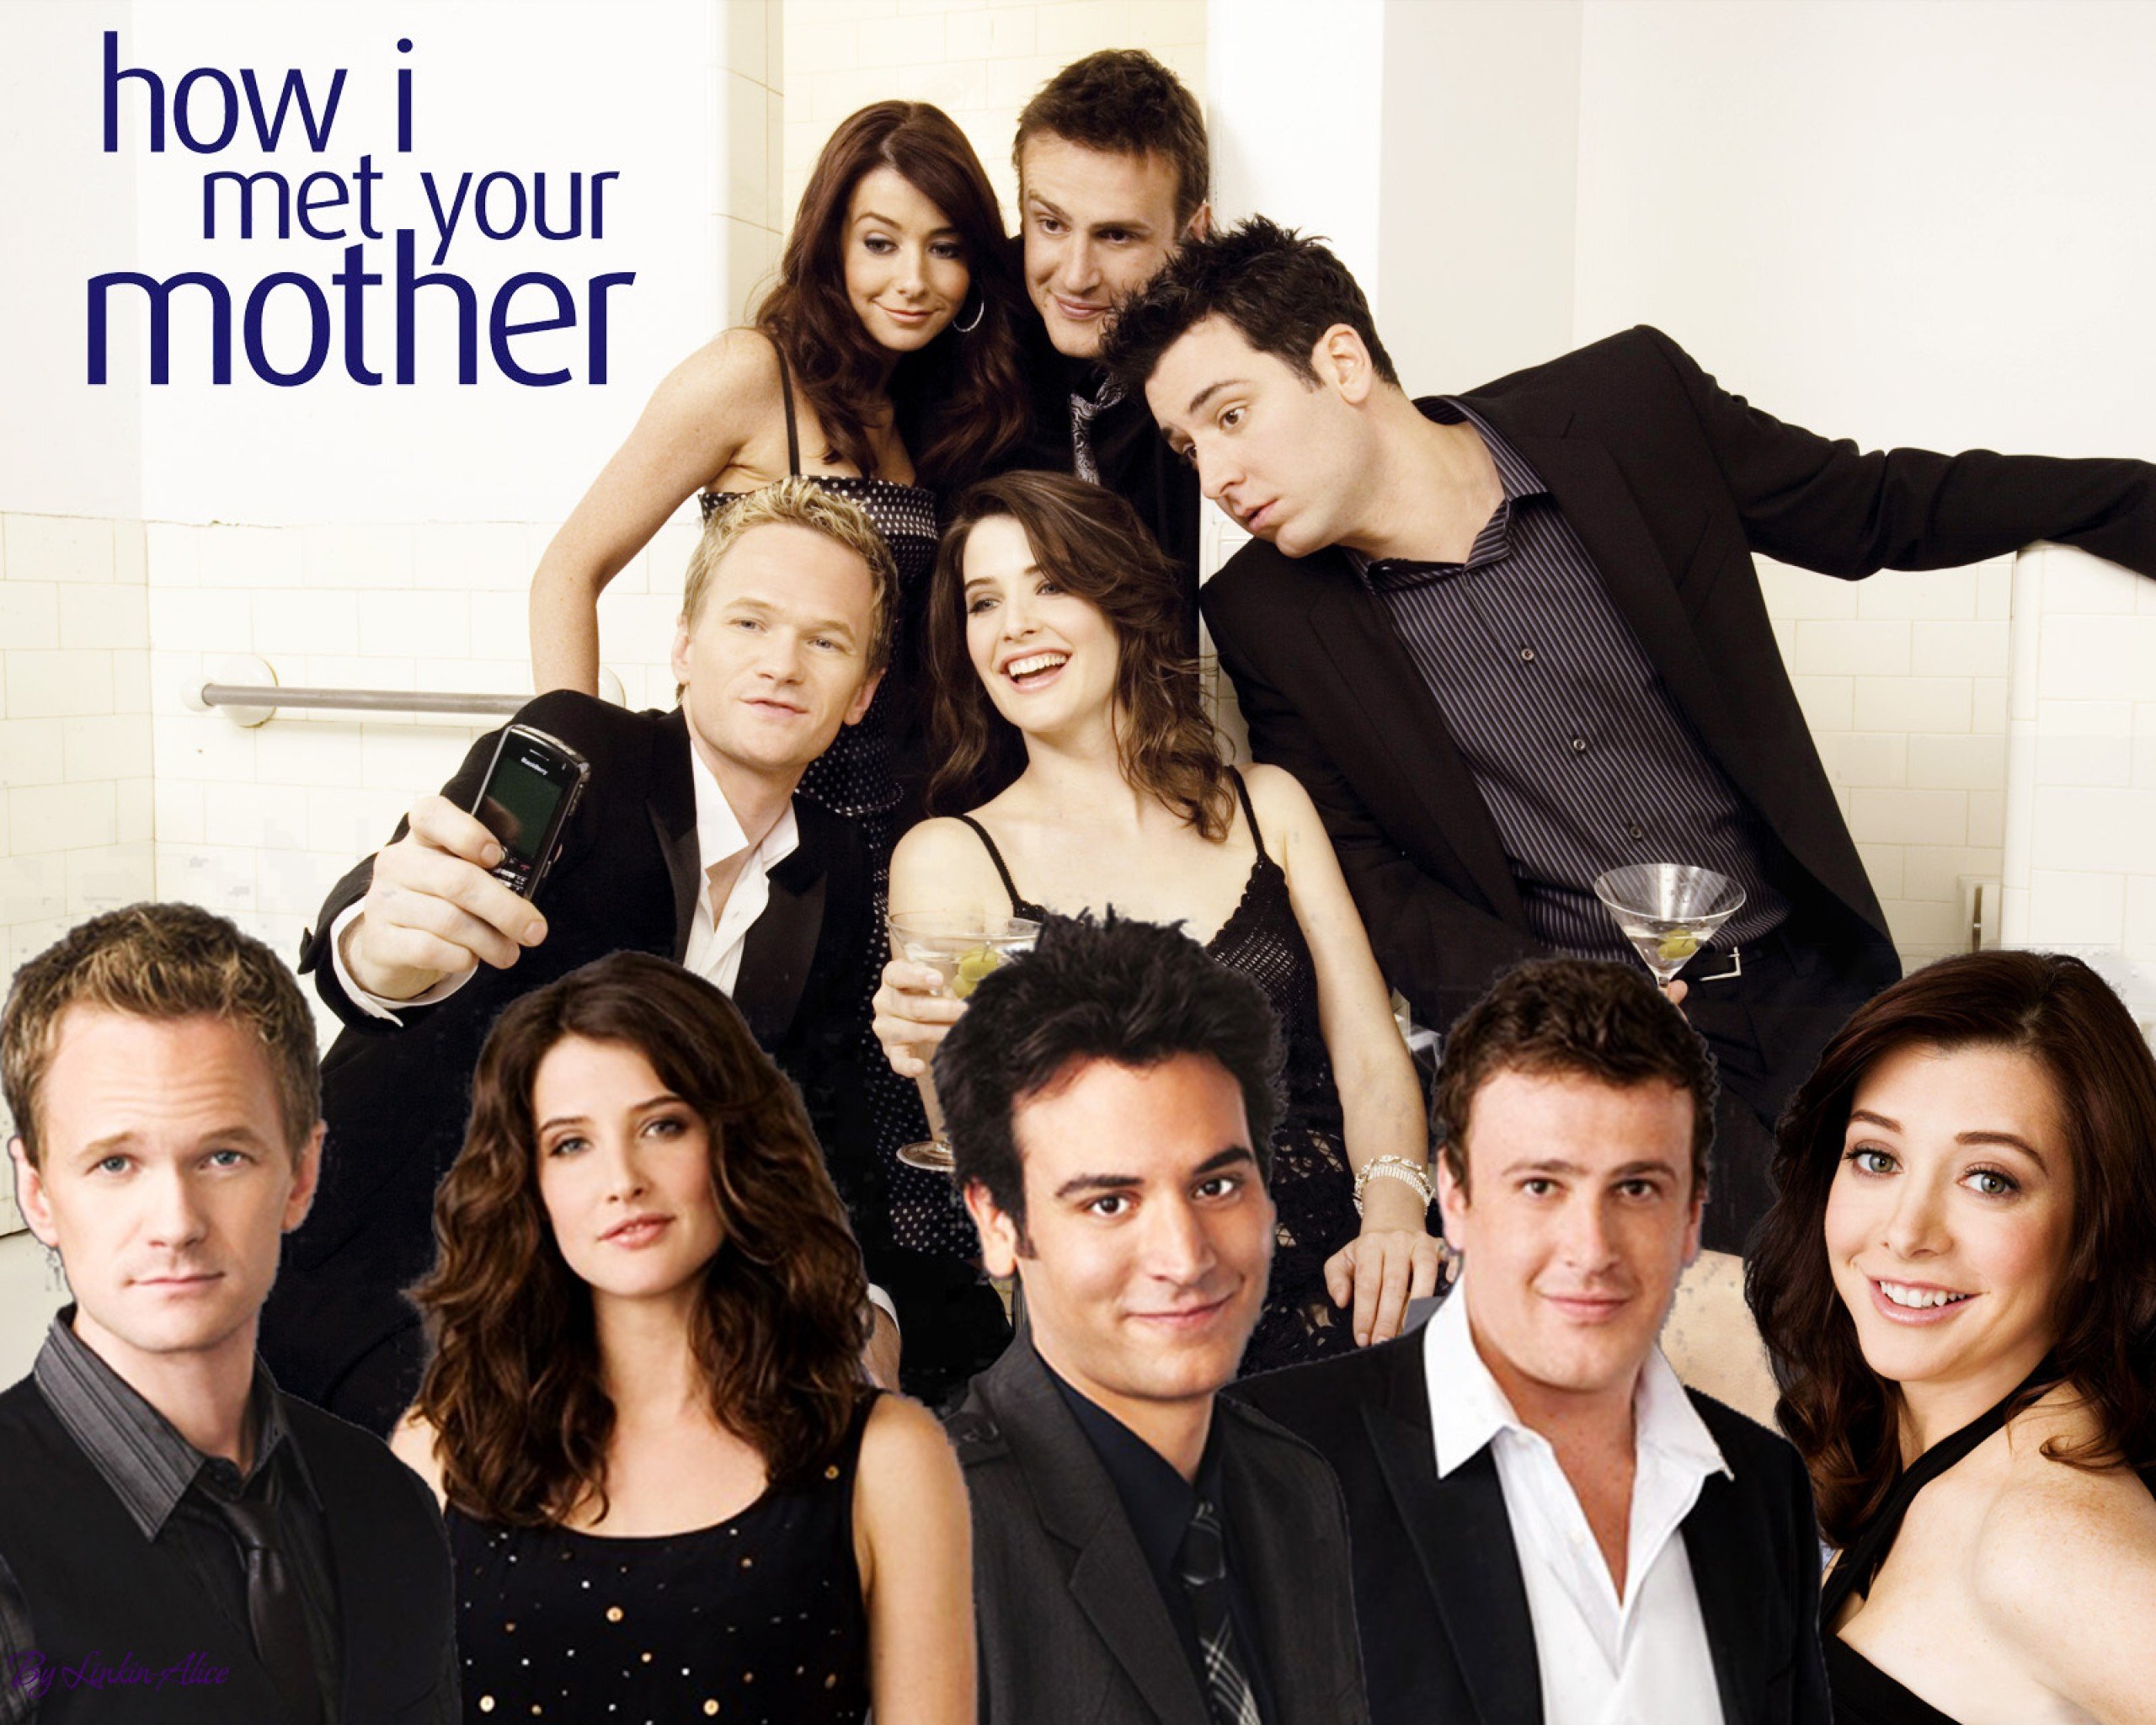 how i met your mother, Comedy, Sitcom, Series, Television, How, Met, Mother,  15 Wallpaper